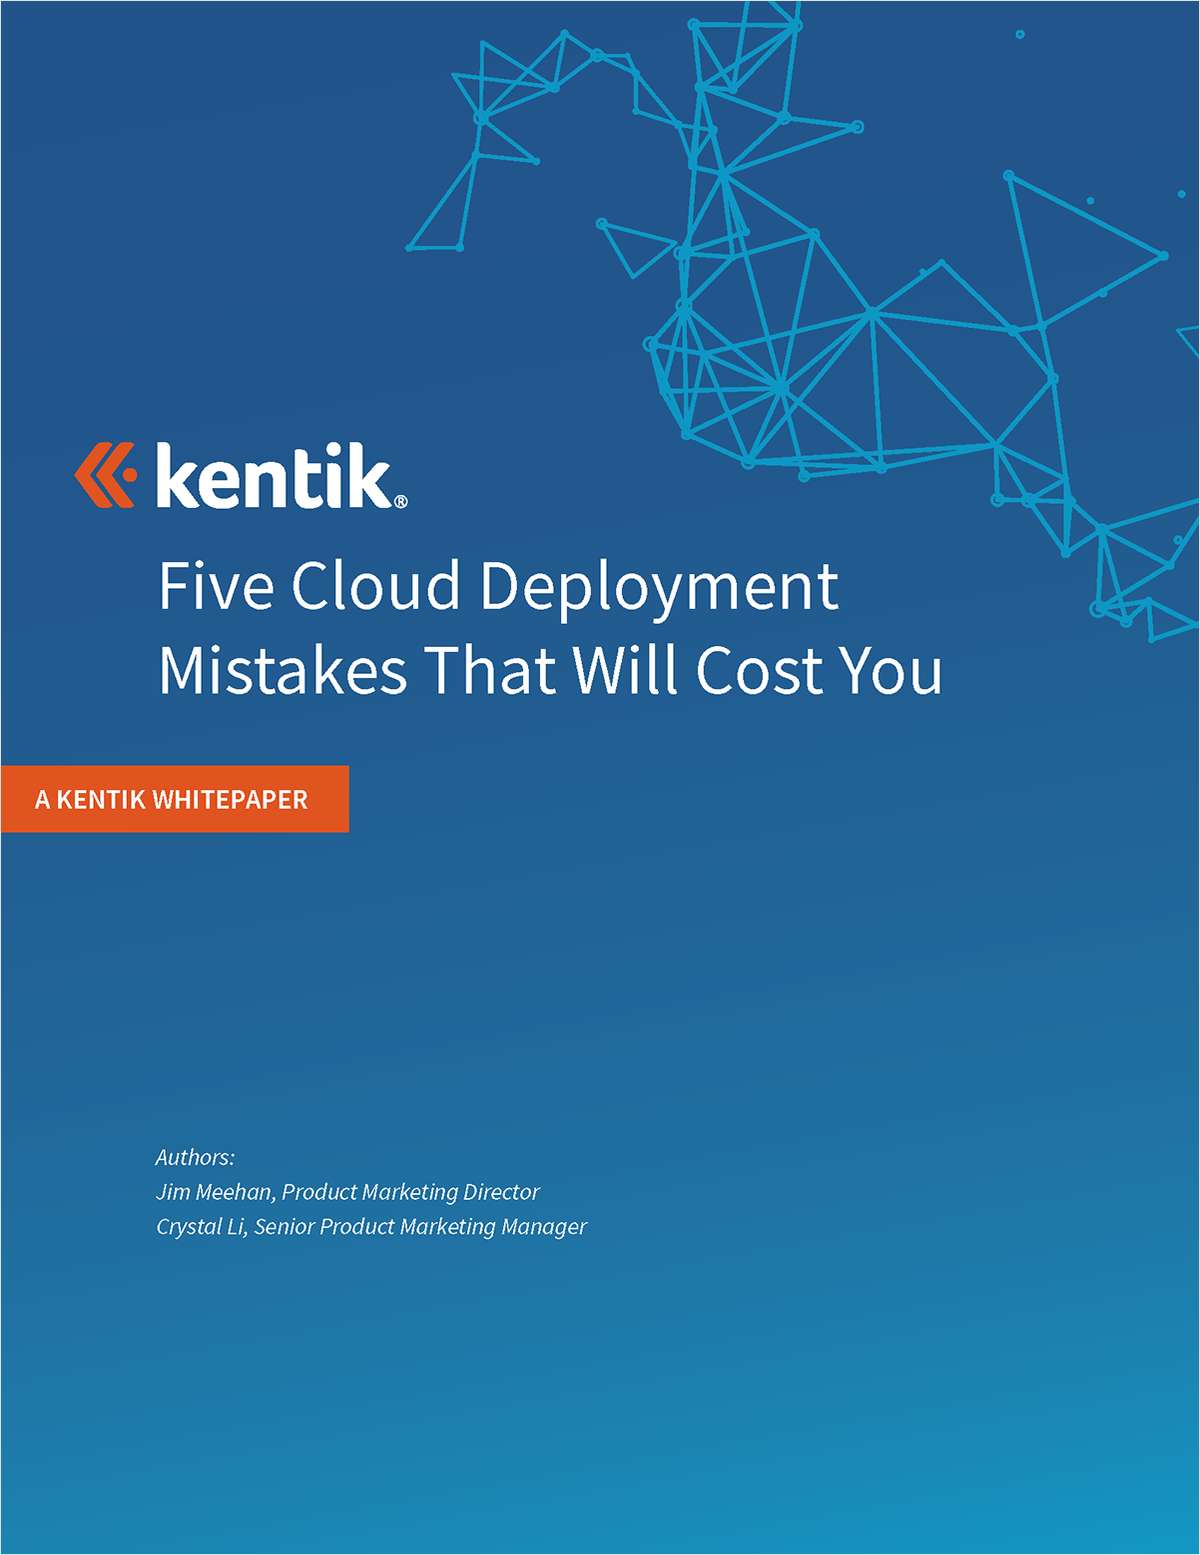 Five Cloud Deployment Mistakes that Will Cost You